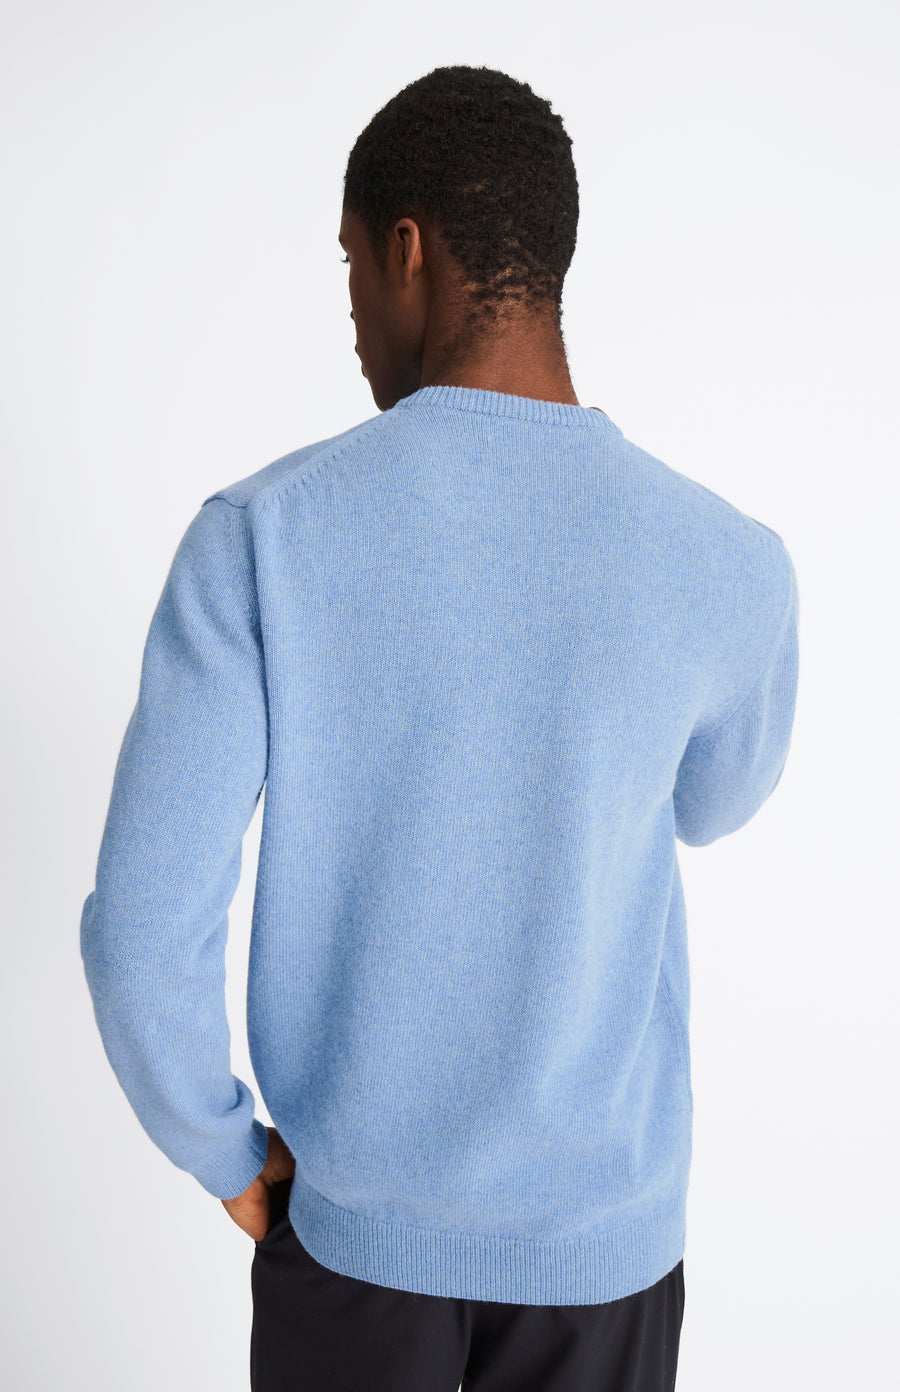 Pringle of Scotland Men's Archive Round Neck Lambswool Jumper in Carolina Blue rear view